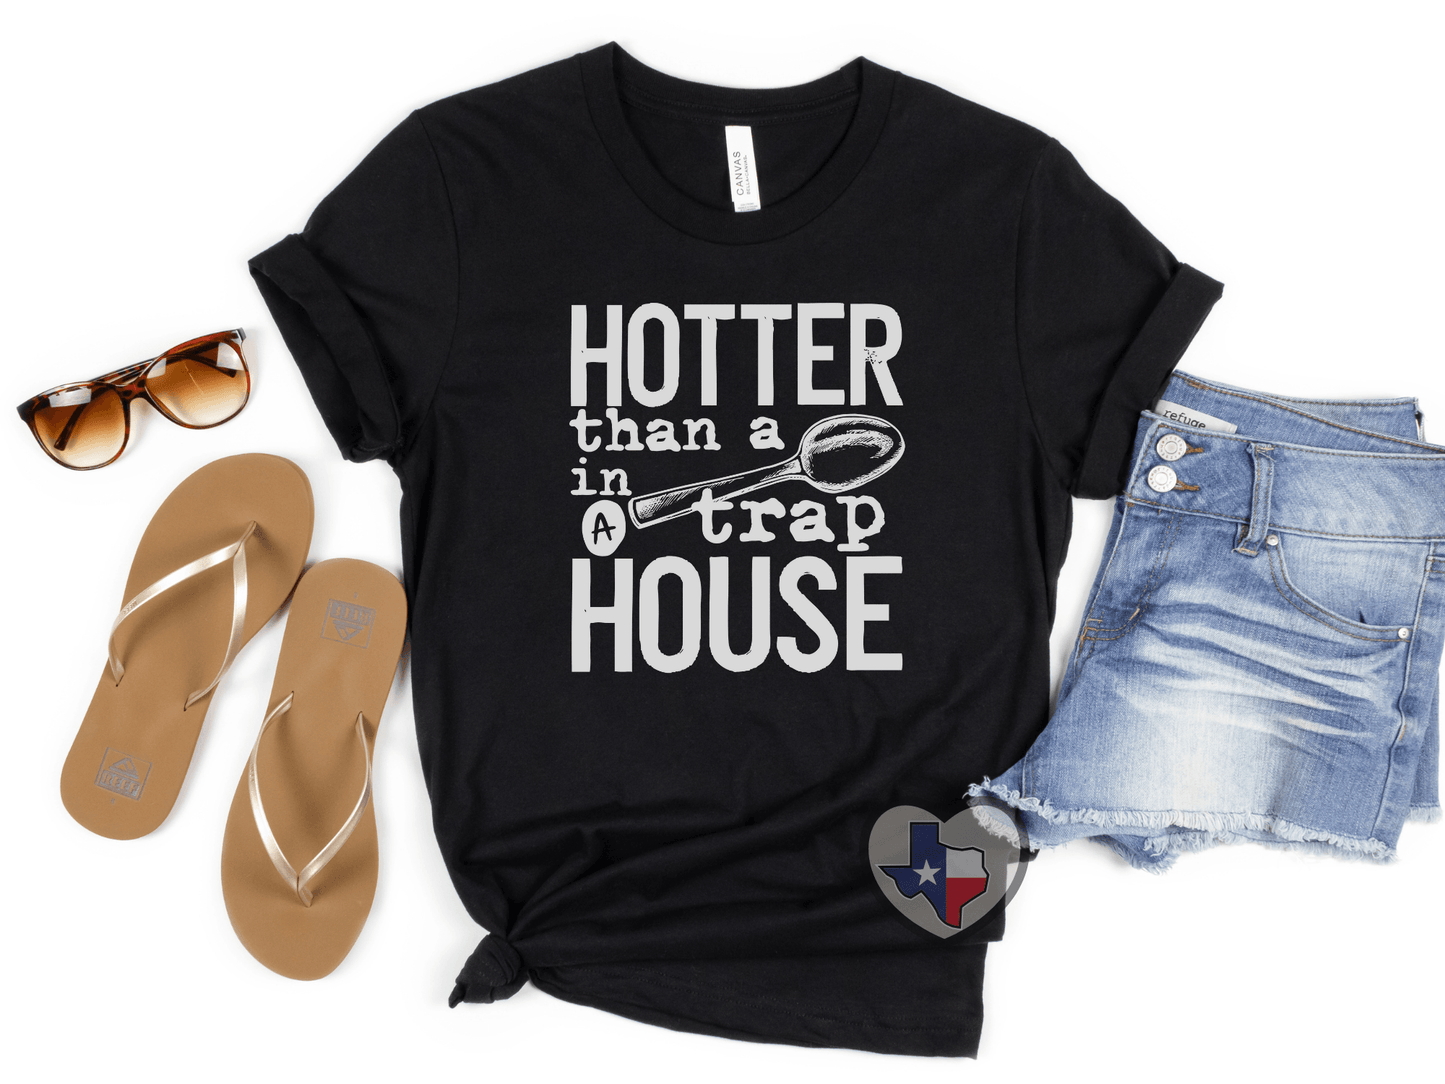 Hotter Than A Spoon In A Trap House (Light Grey) - Texas Transfers and Designs